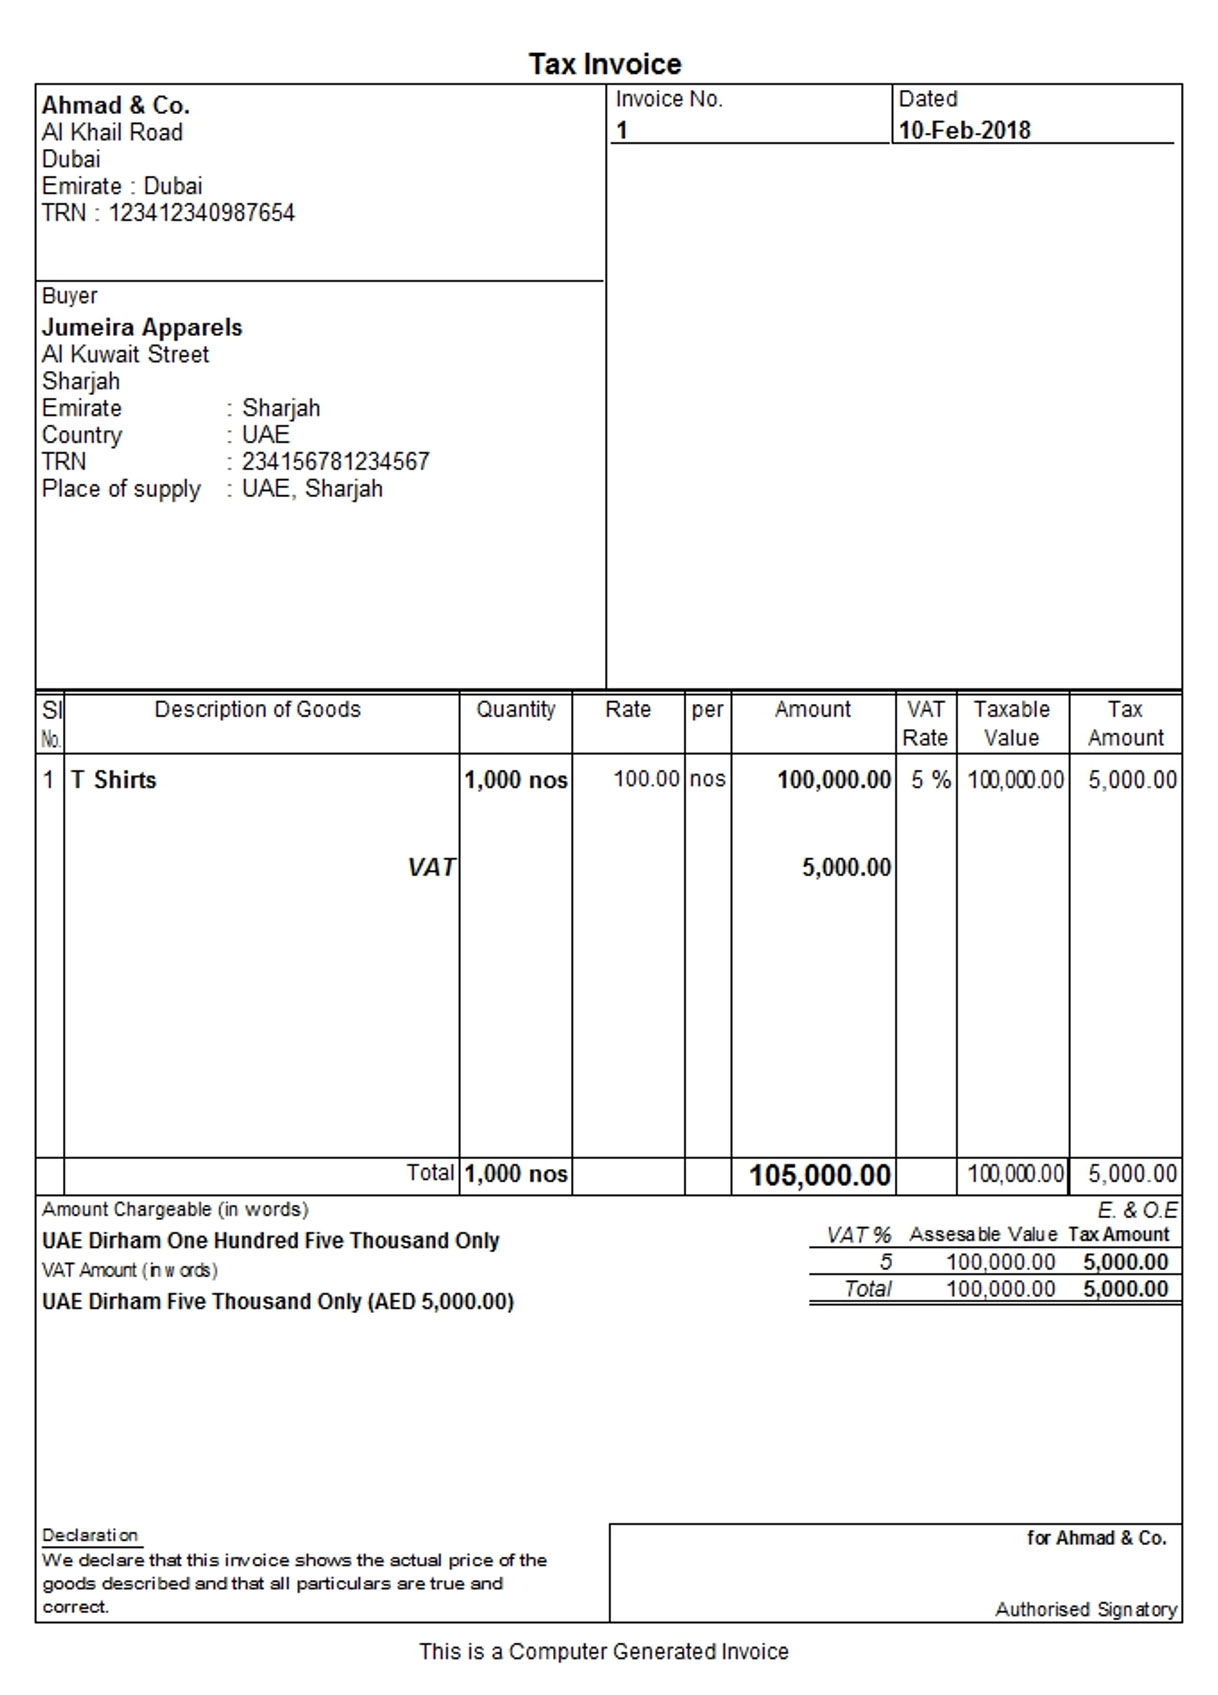 Tax Invoice to a registered customer under VAT in UAE